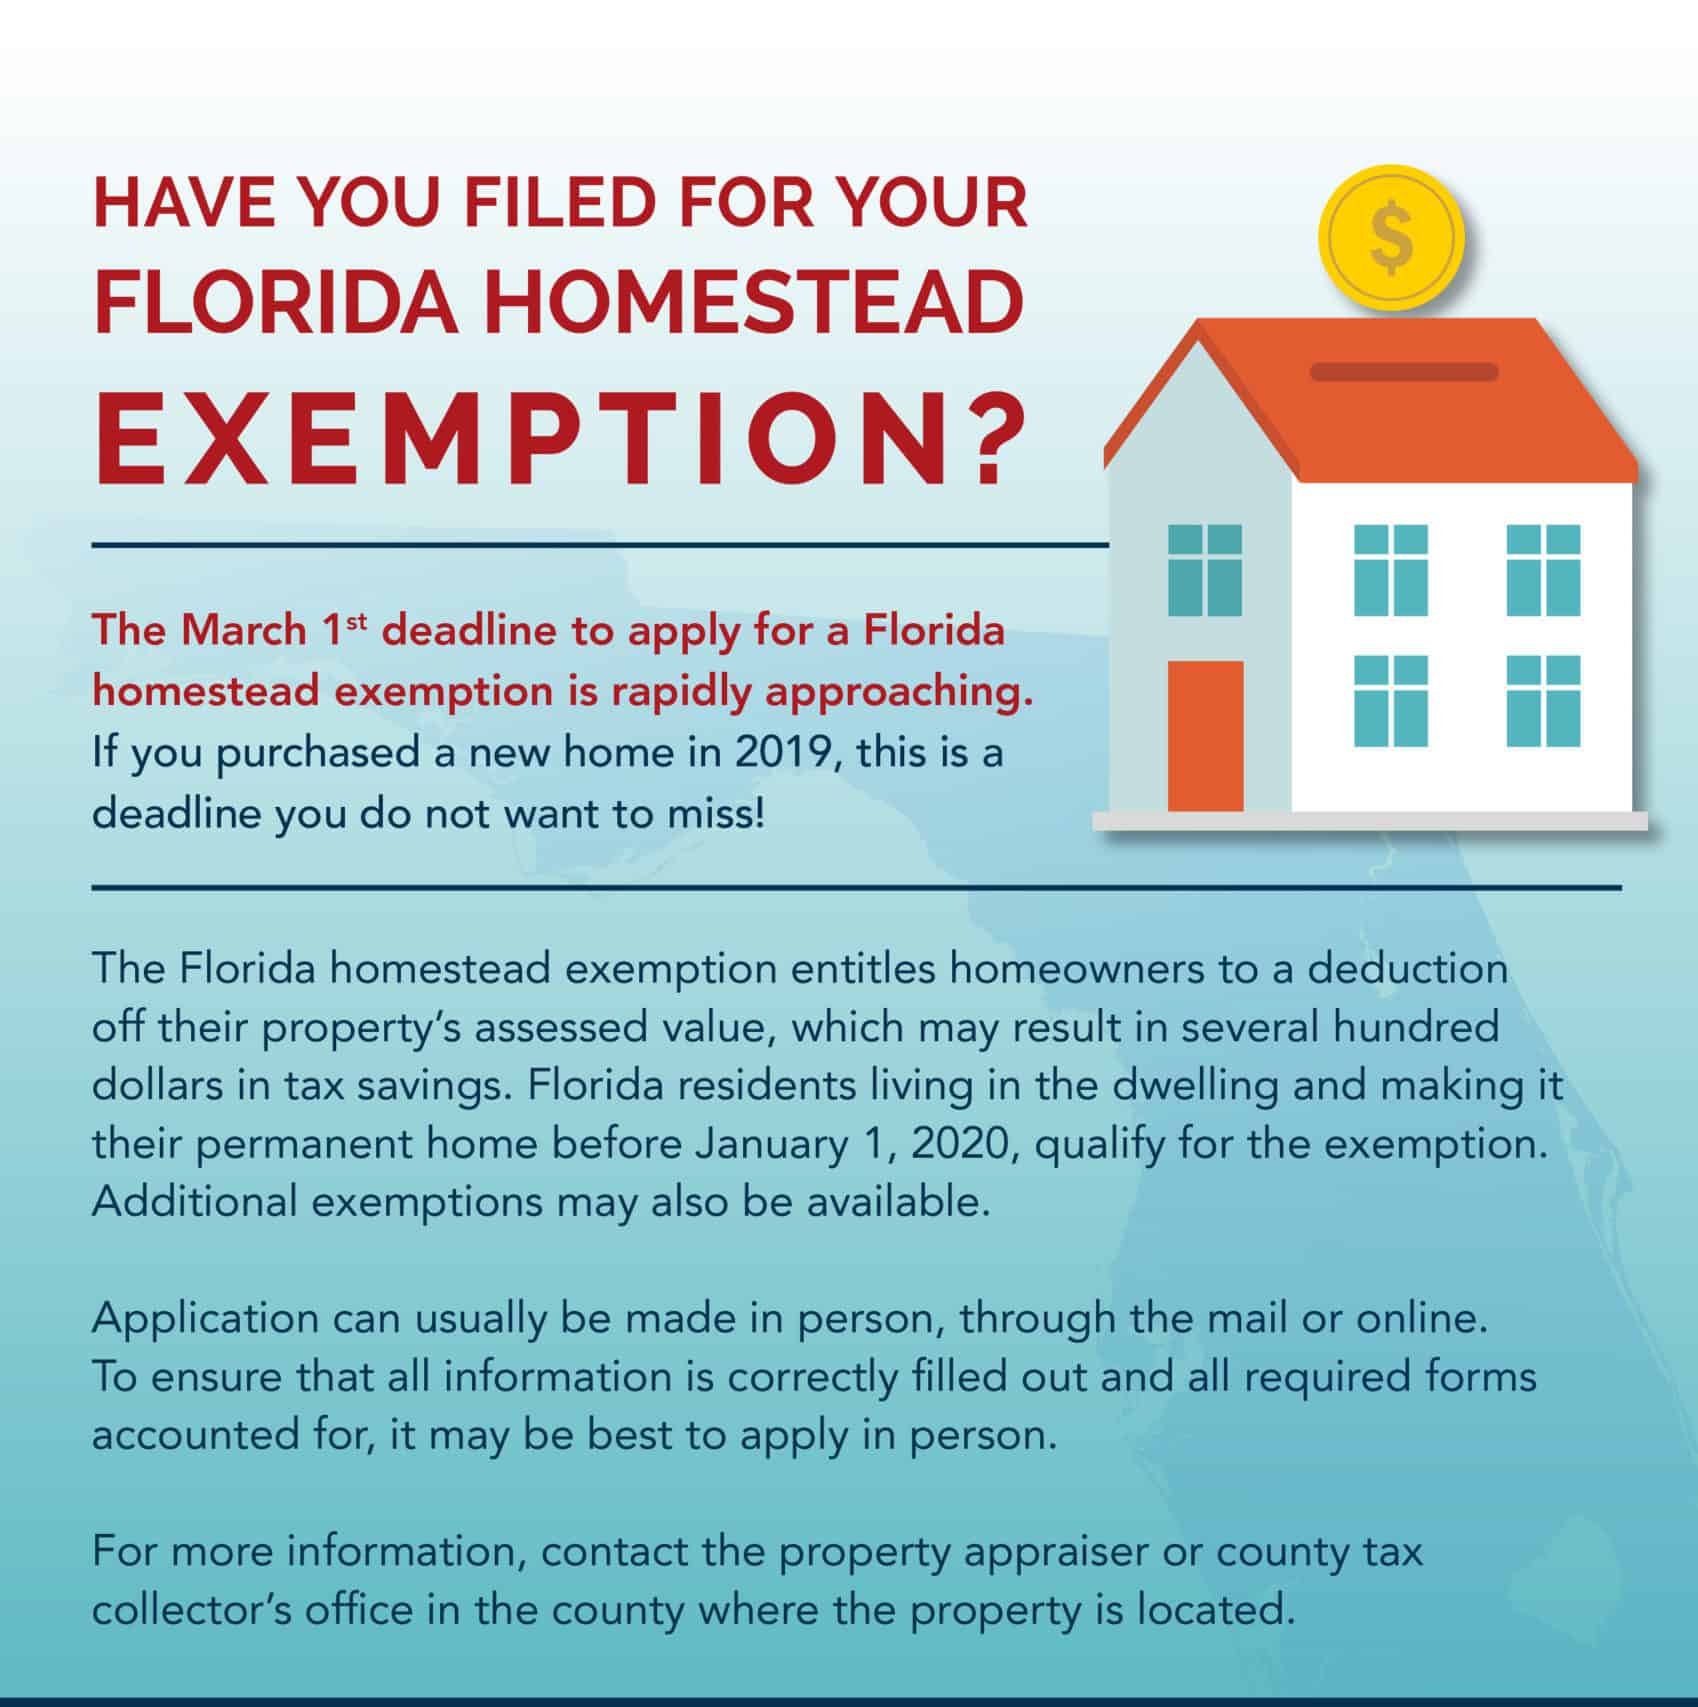 how-to-file-for-florida-homestead-exemption-tutorial-pics